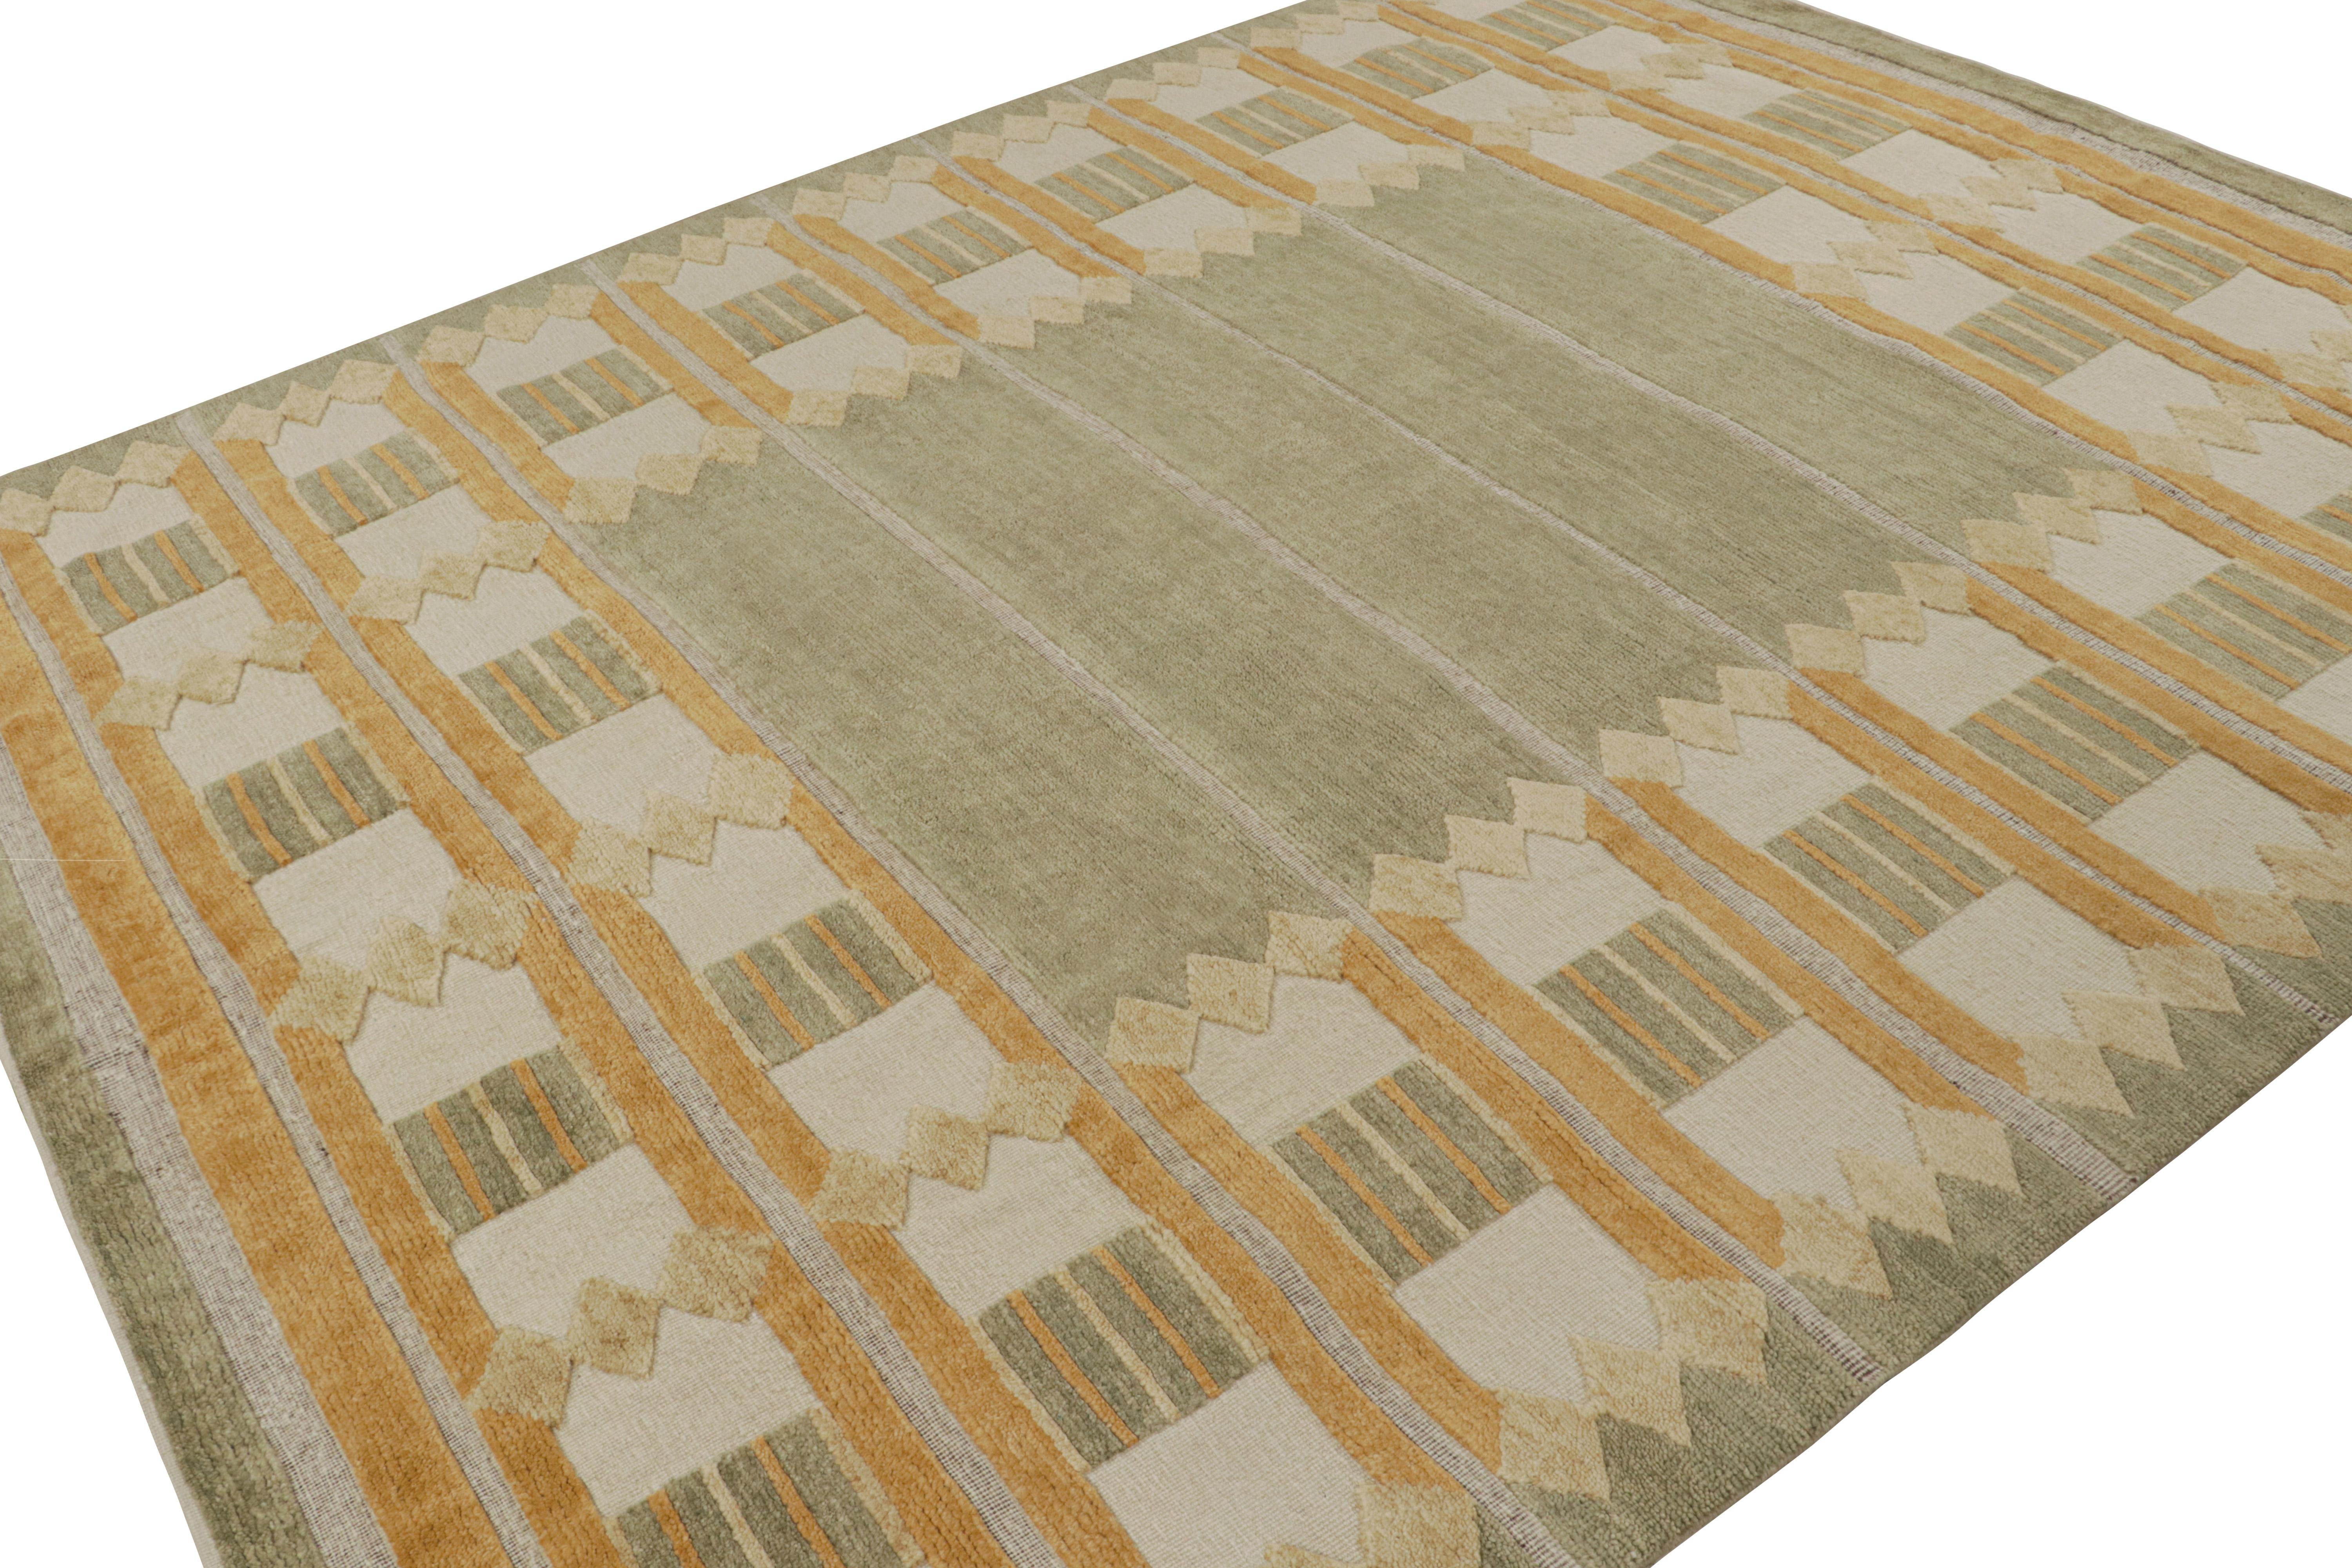 This 8x10 custom rug is from the Scandinavian rug collection by Rug & Kilim. Hand-knotted in wool and undyed natural yarns, its design is a modern take on Rollakan and Rya rugs in the Swedish Deco style. 

On the Design: 

The Swedish style rug